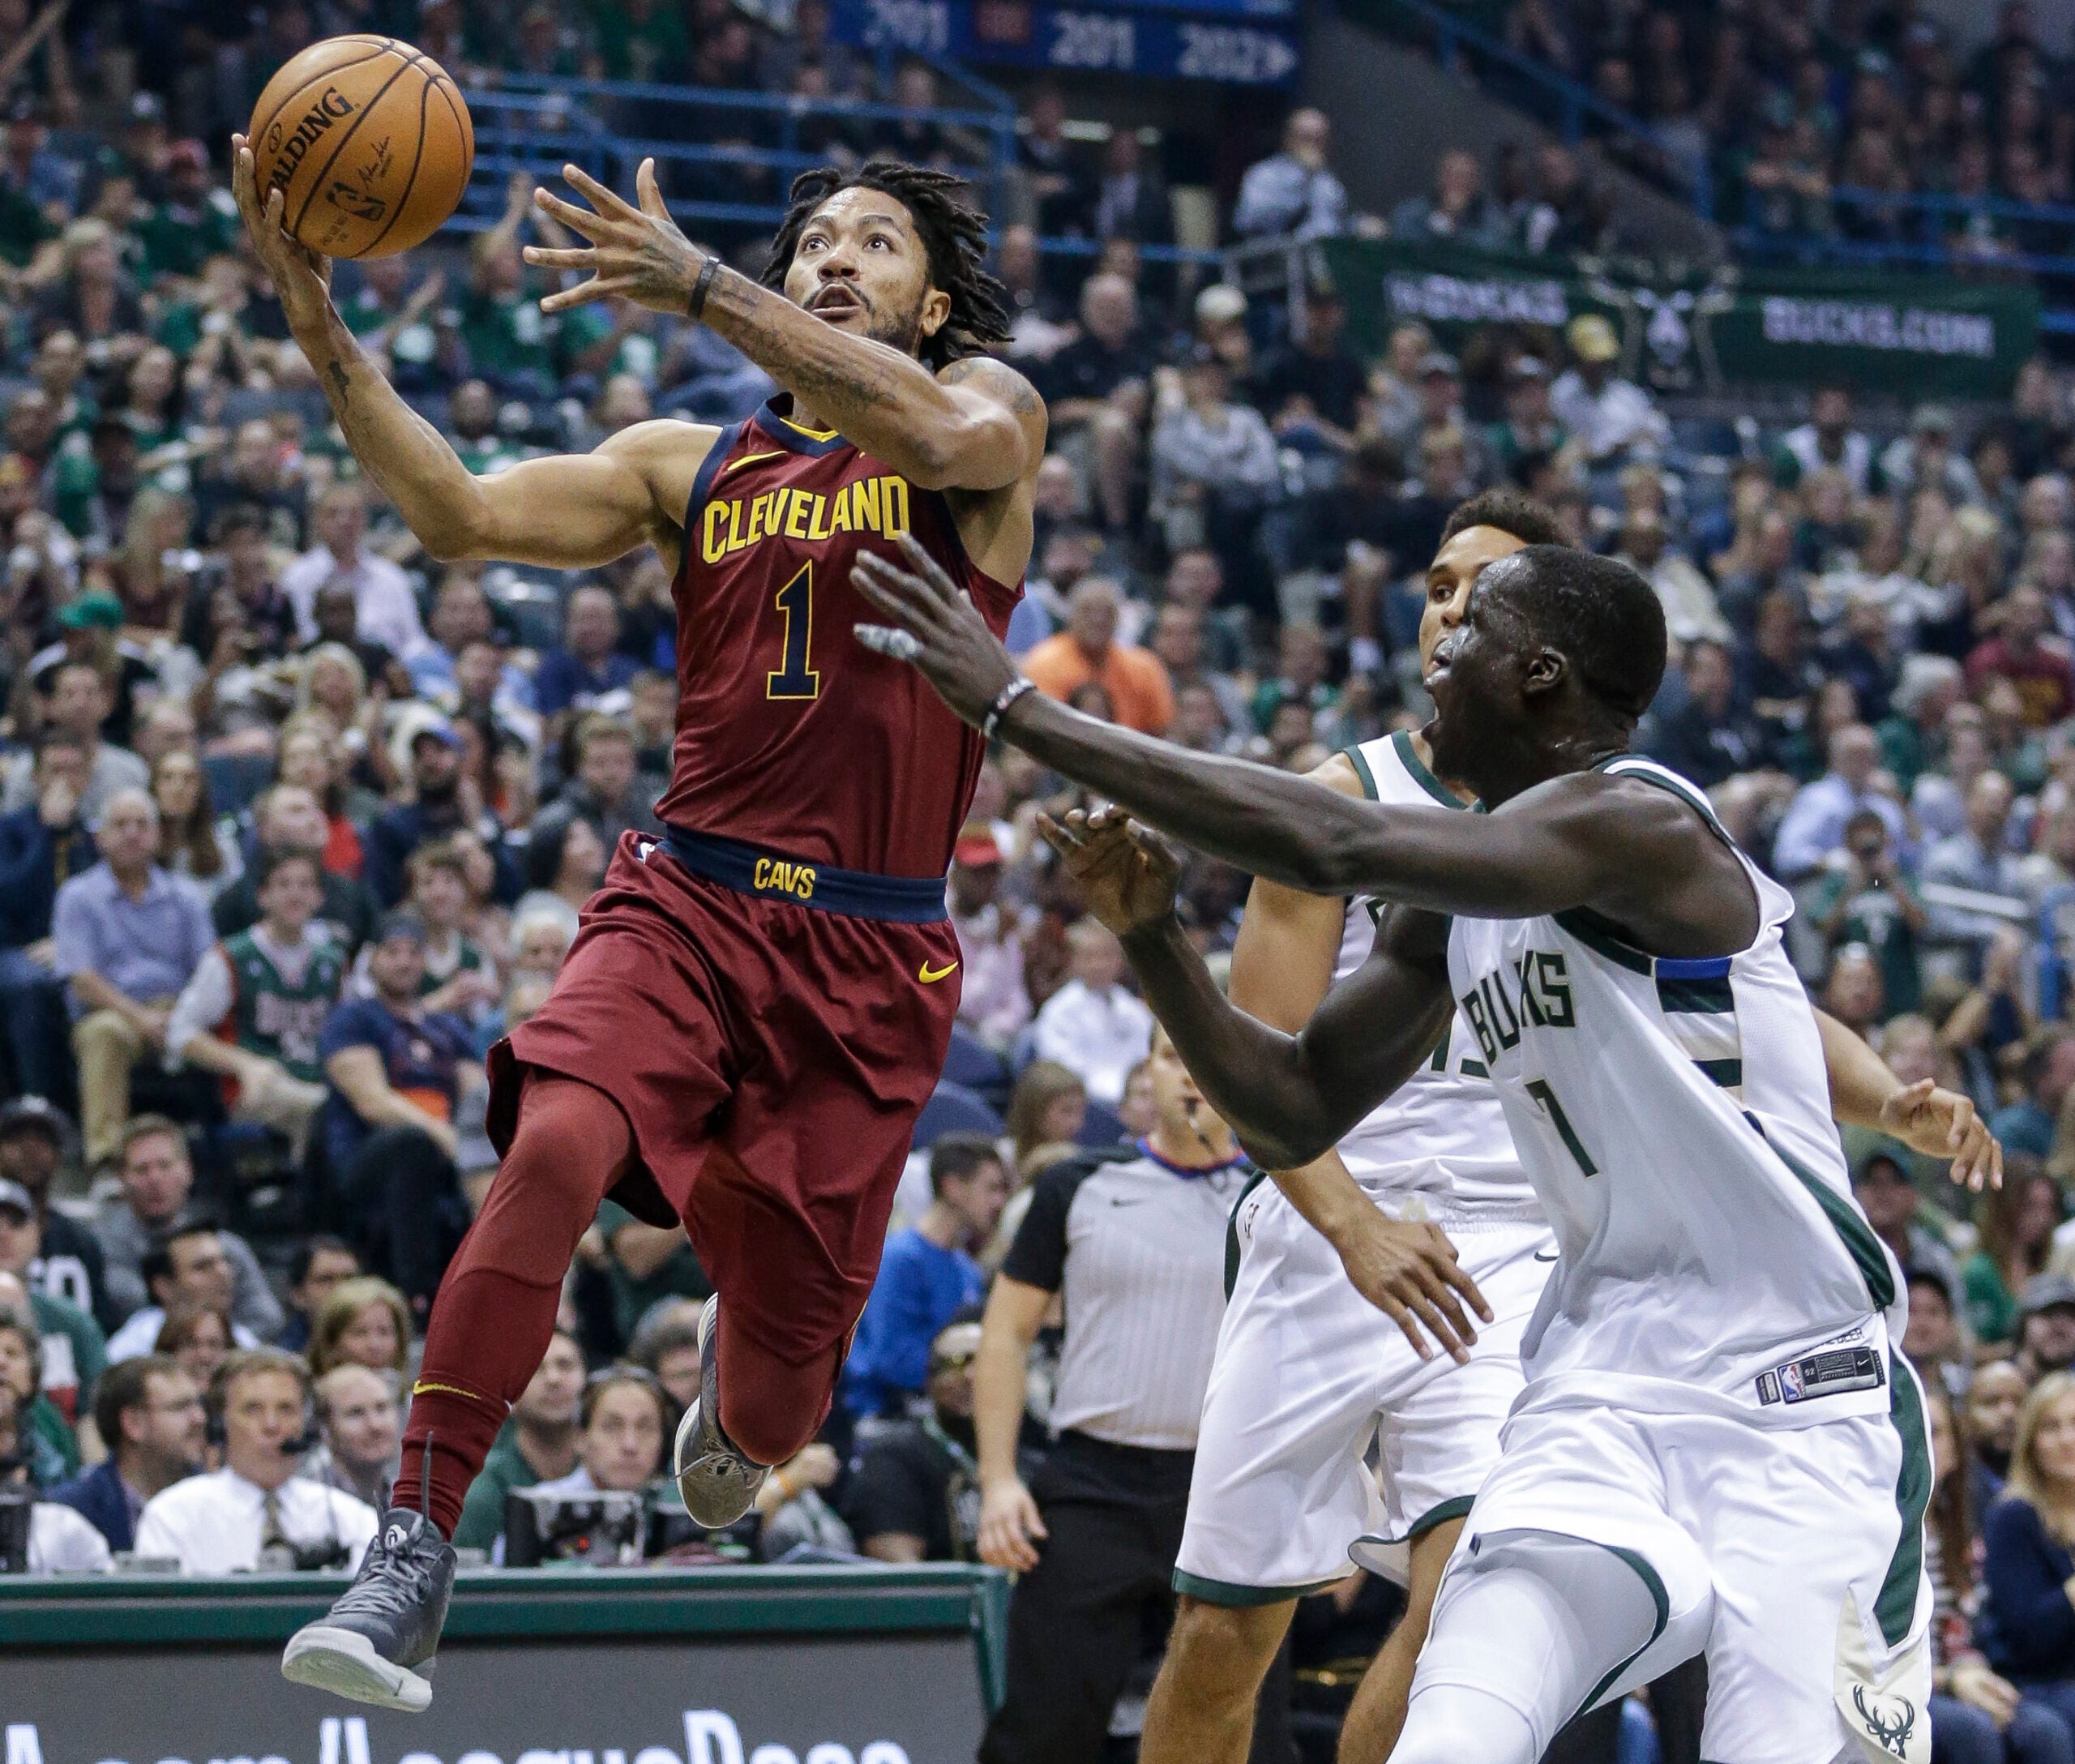 Cavs News: Derrick Rose To Miss At Least Next Two Weeks With Ankle